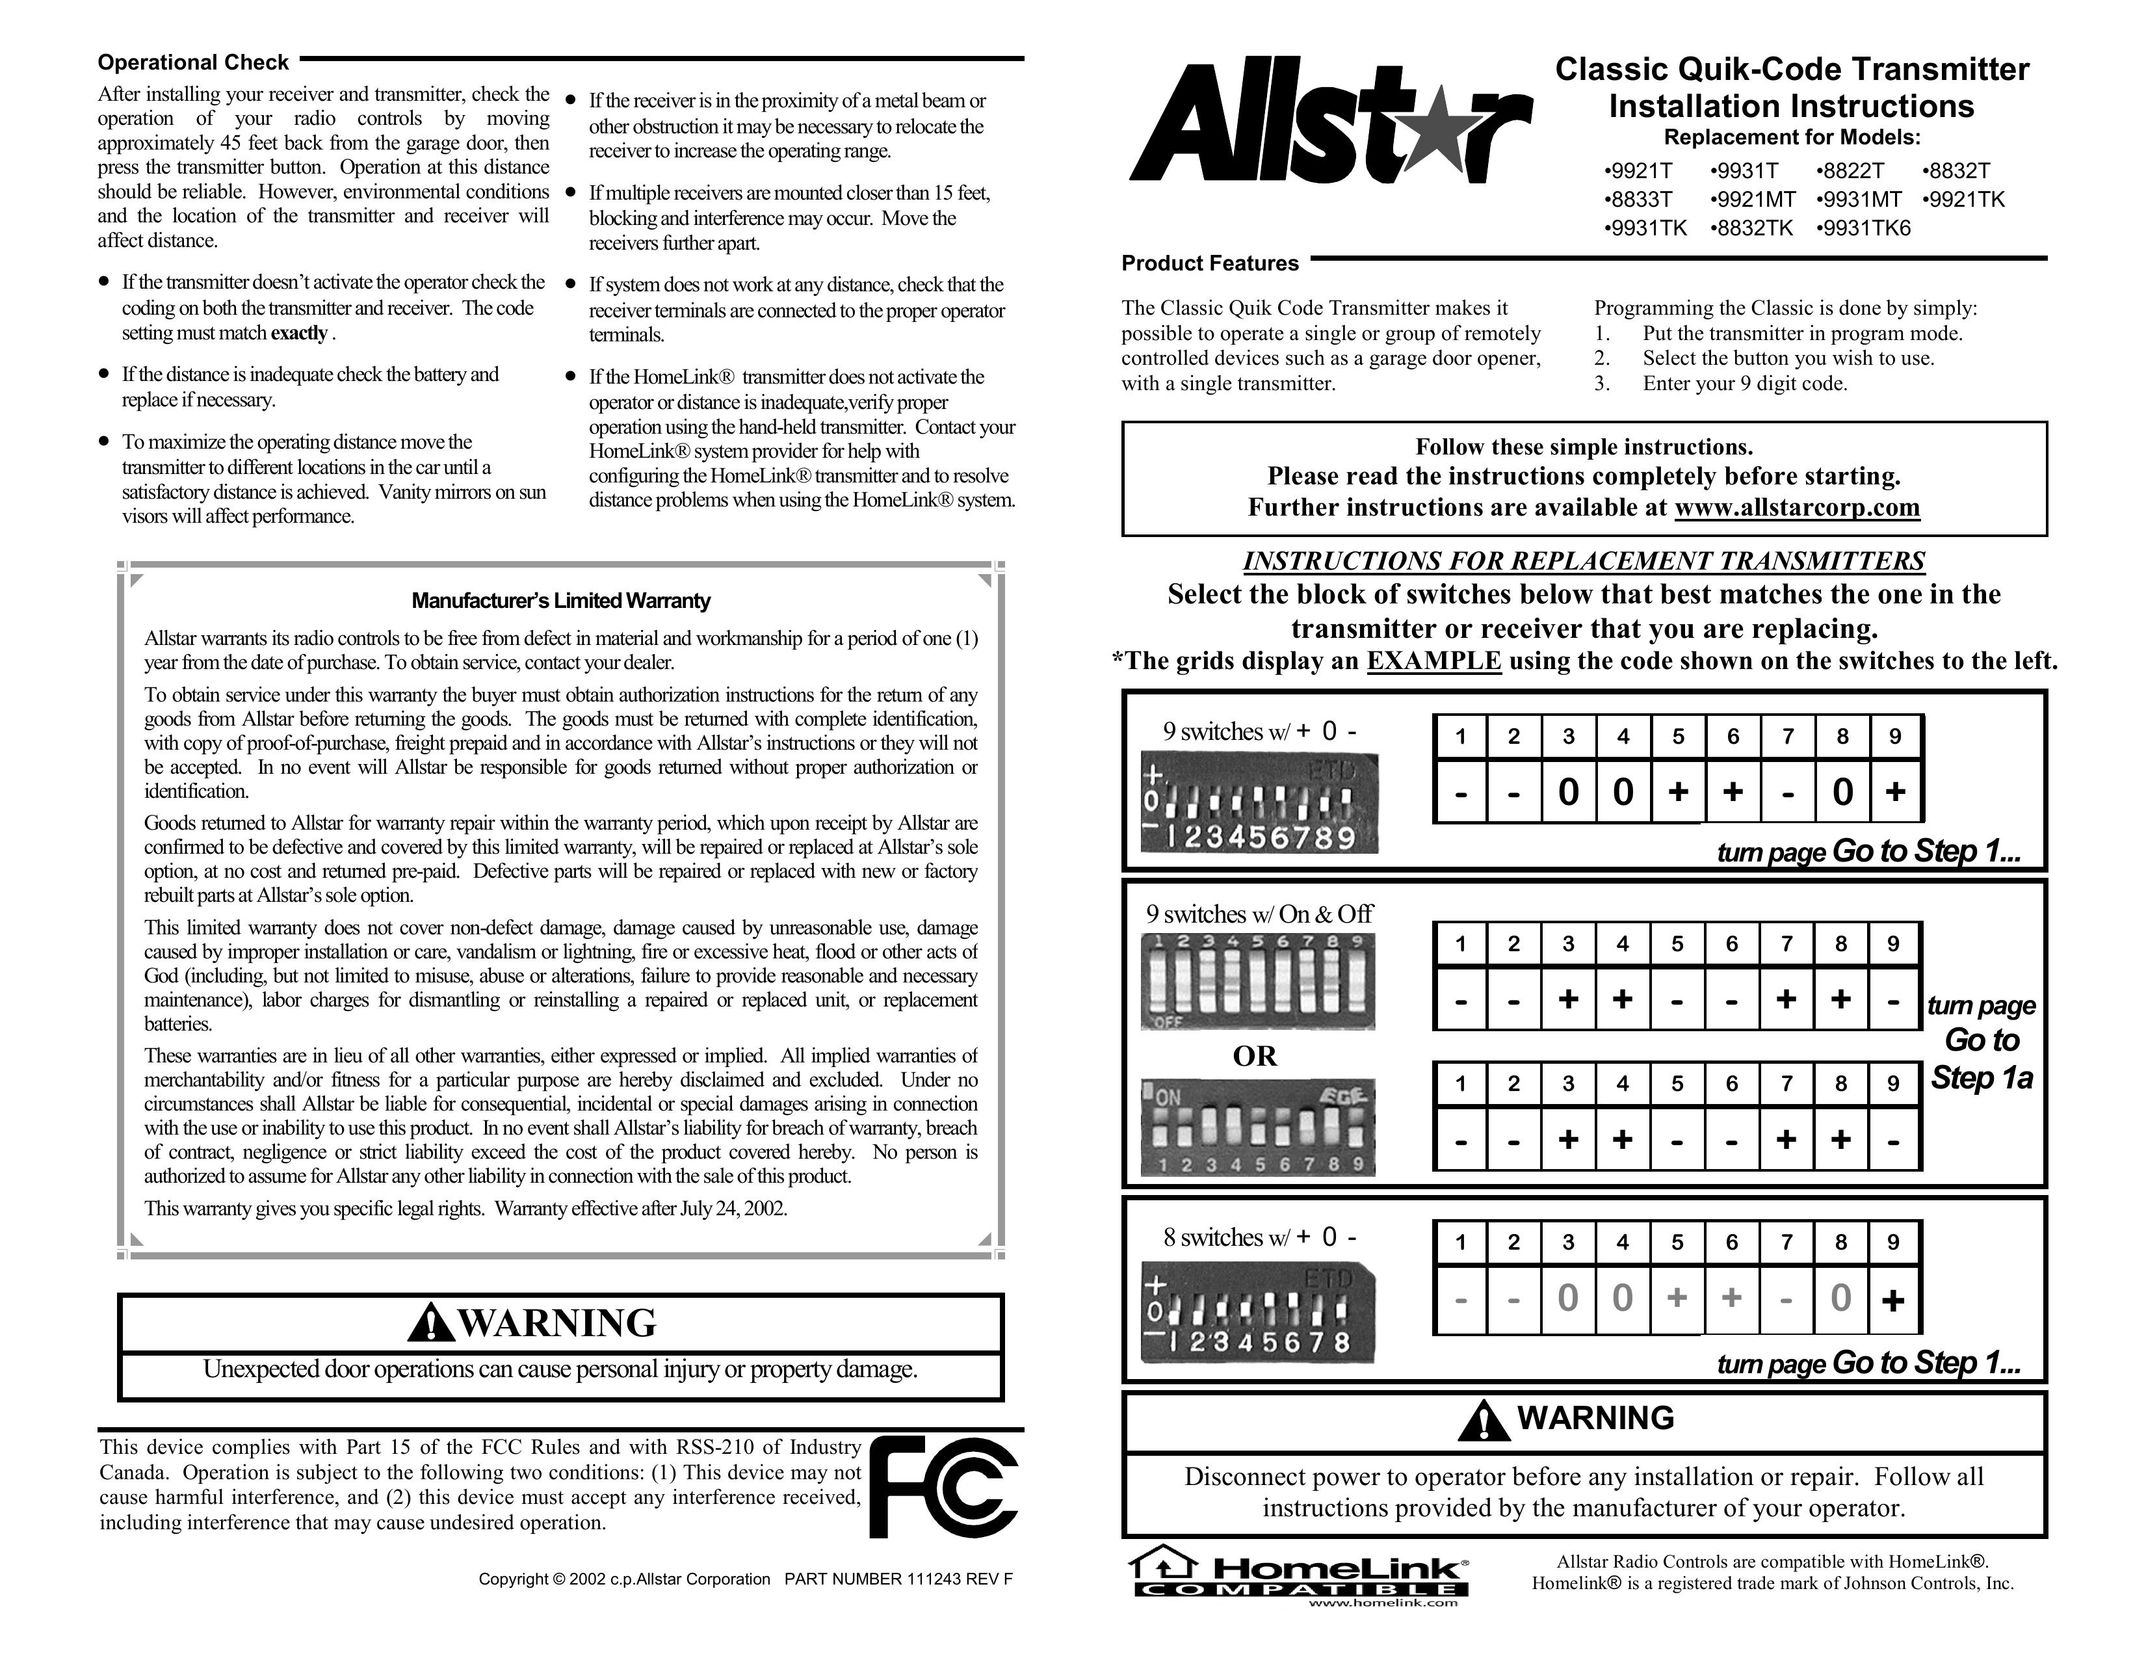 Allstar Products Group 8833T Satellite Radio User Manual (Page 1)